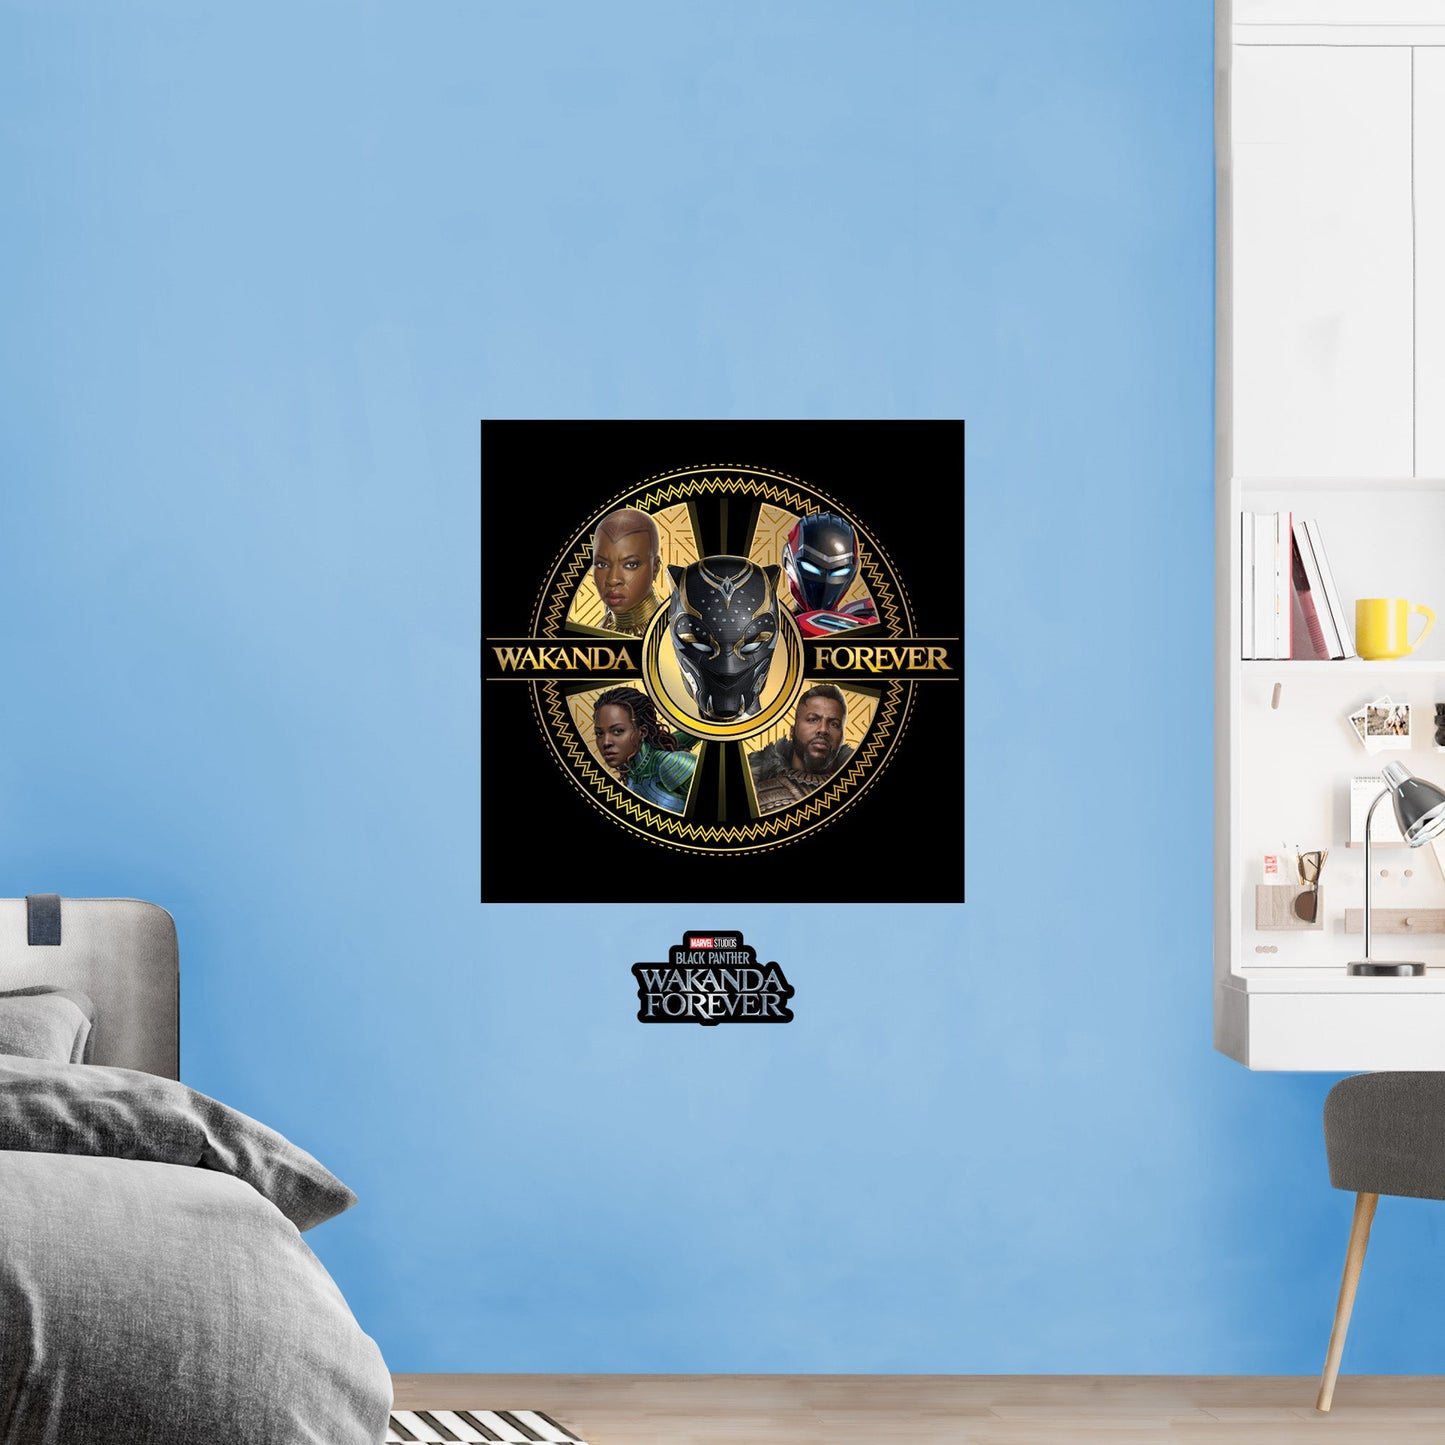 Black Panther Wakanda Forever: Black Panther Wakanda Forever Circle Poster - Officially Licensed Marvel Removable Adhesive Decal